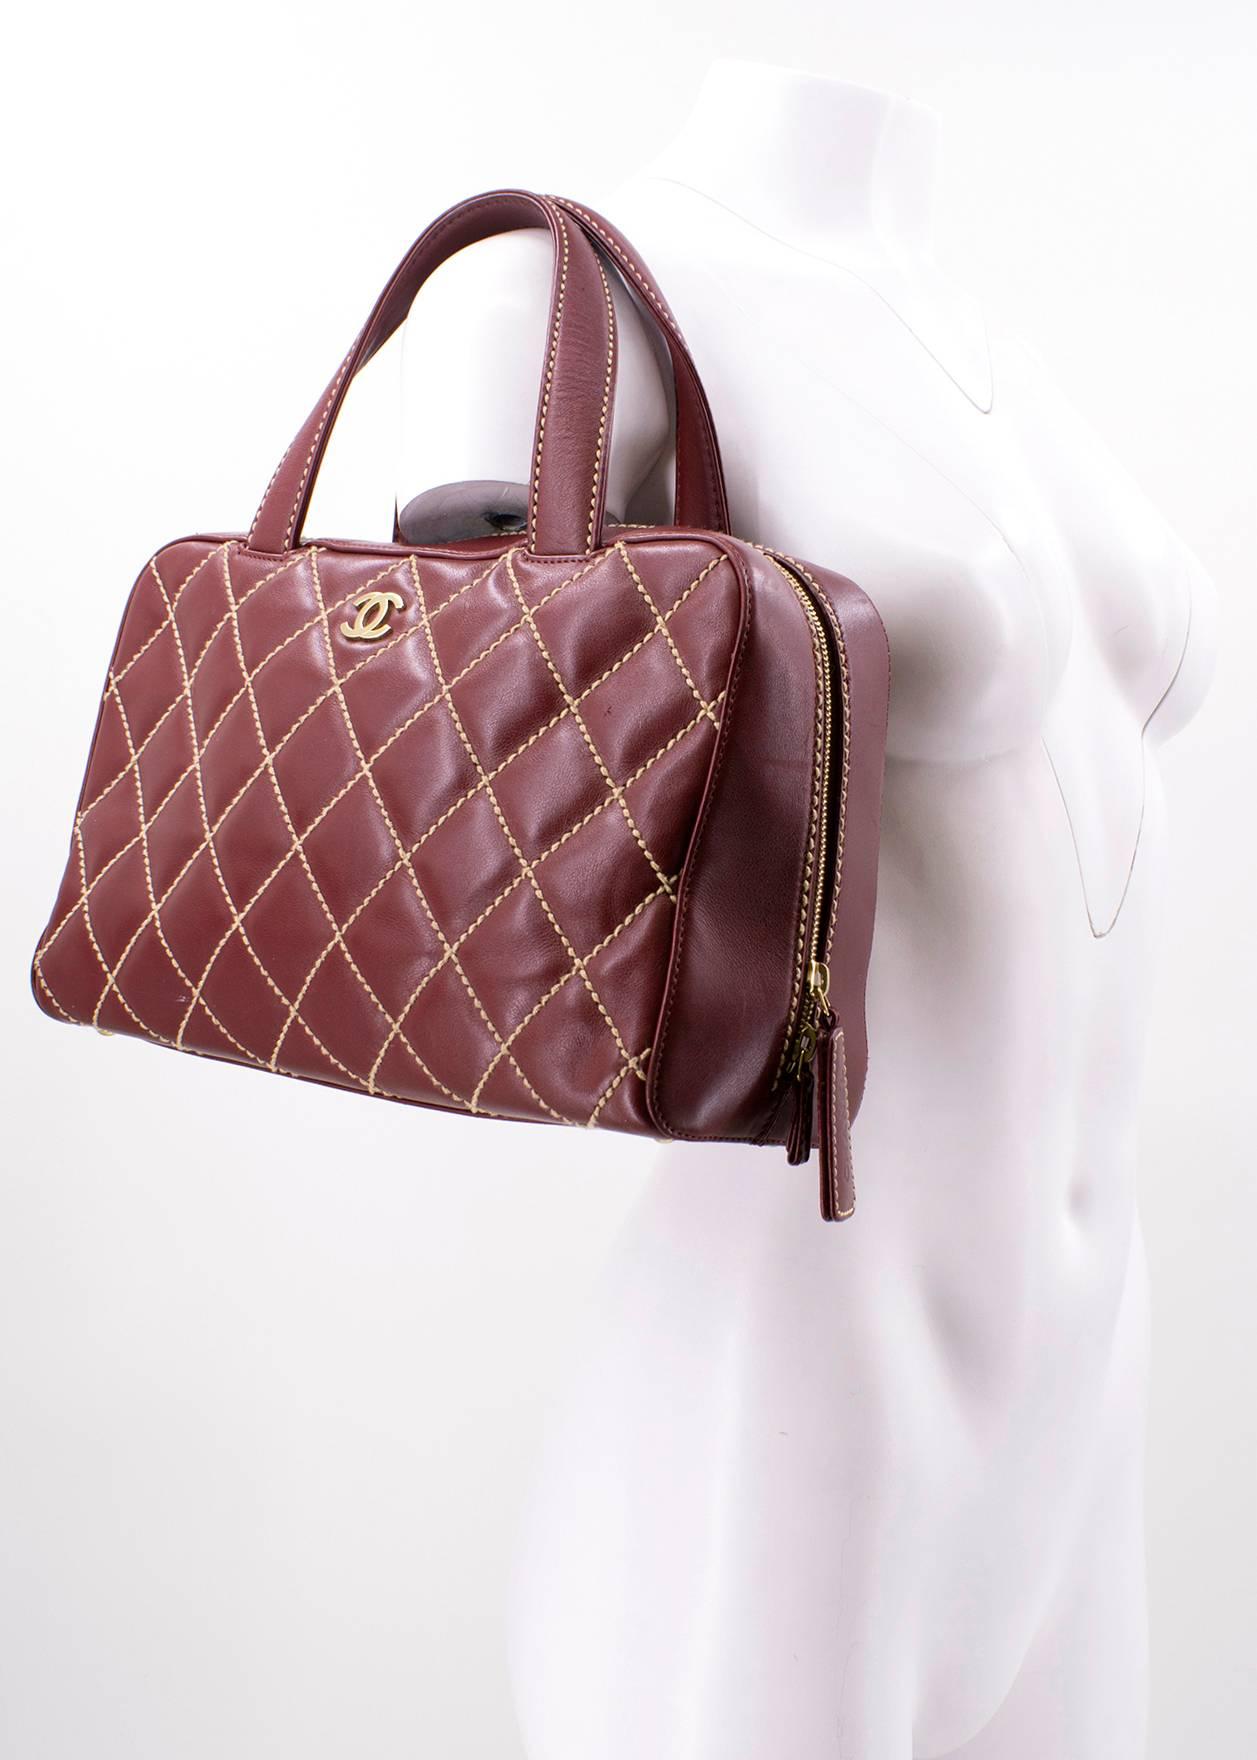 Chanel Top Handle Cherry Quilted bag  In Excellent Condition For Sale In London, GB